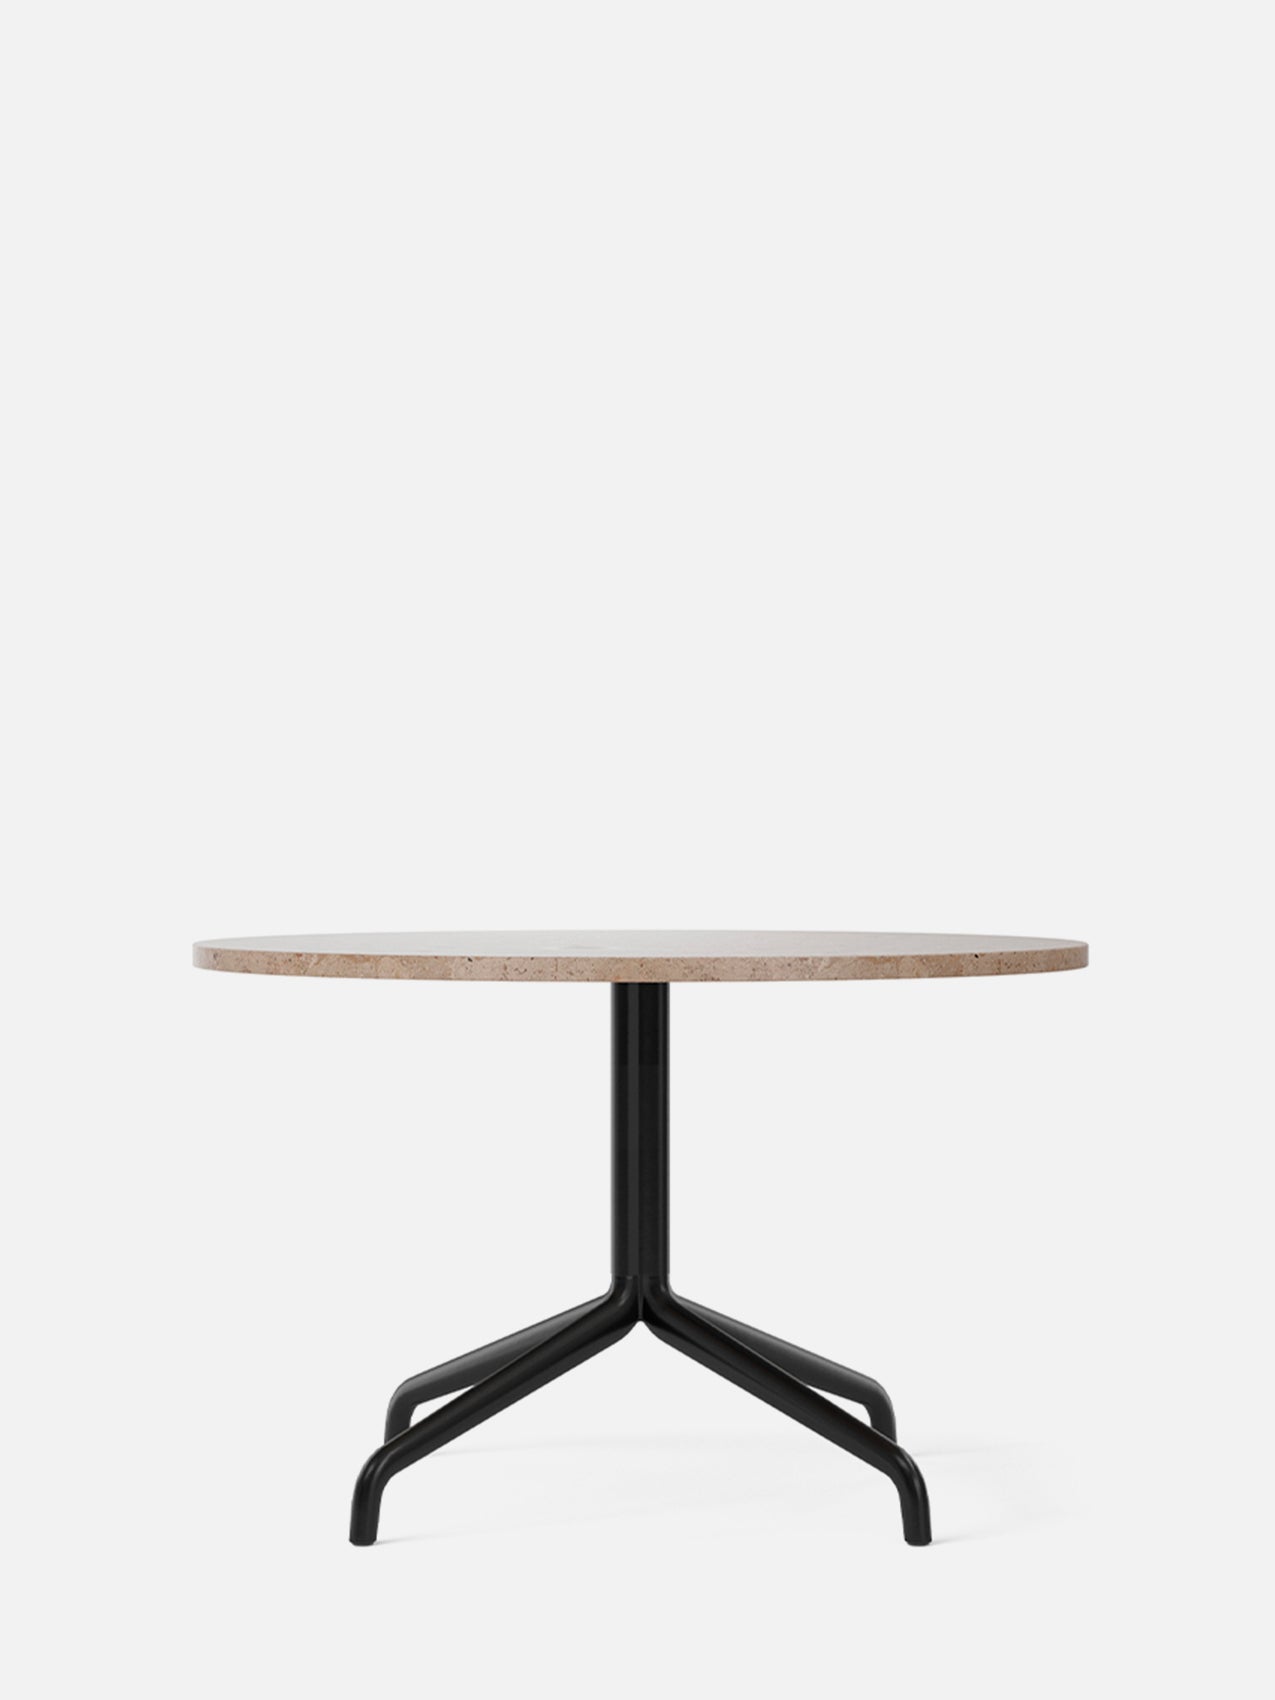 Harbour Column Table, Round Table Top-Café Table-Norm Architects-Lounge Height (19.7in) - Star Base-Round 32in - Sand Stone-menu-minimalist-modern-danish-design-home-decor